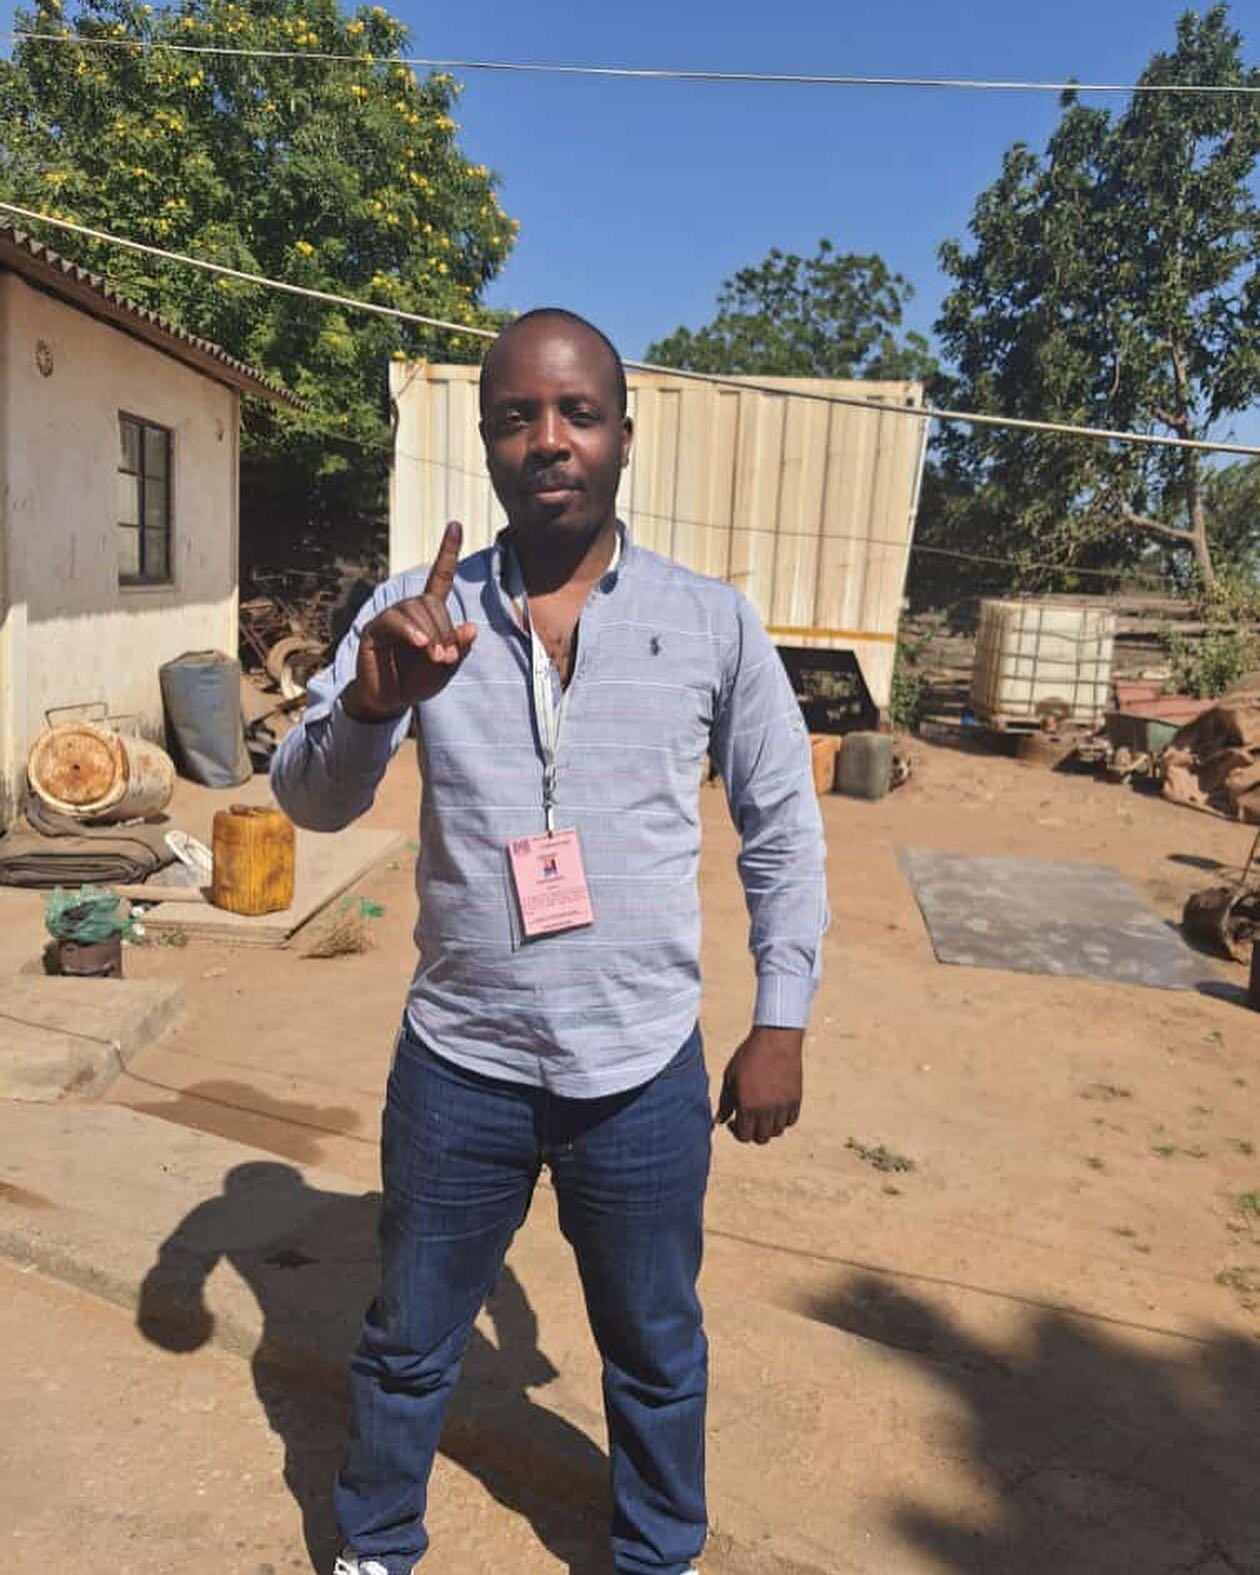 Victor @Chreaamalawi and  @chikondichijozi exercising their right to vote in the Malawi elections today ✊🇲🇼 .
.
.
Today Malawi votes in historic re-run election.  In May 2019, Mutharika thought he was the victor by a slim margin when he gained 38.6